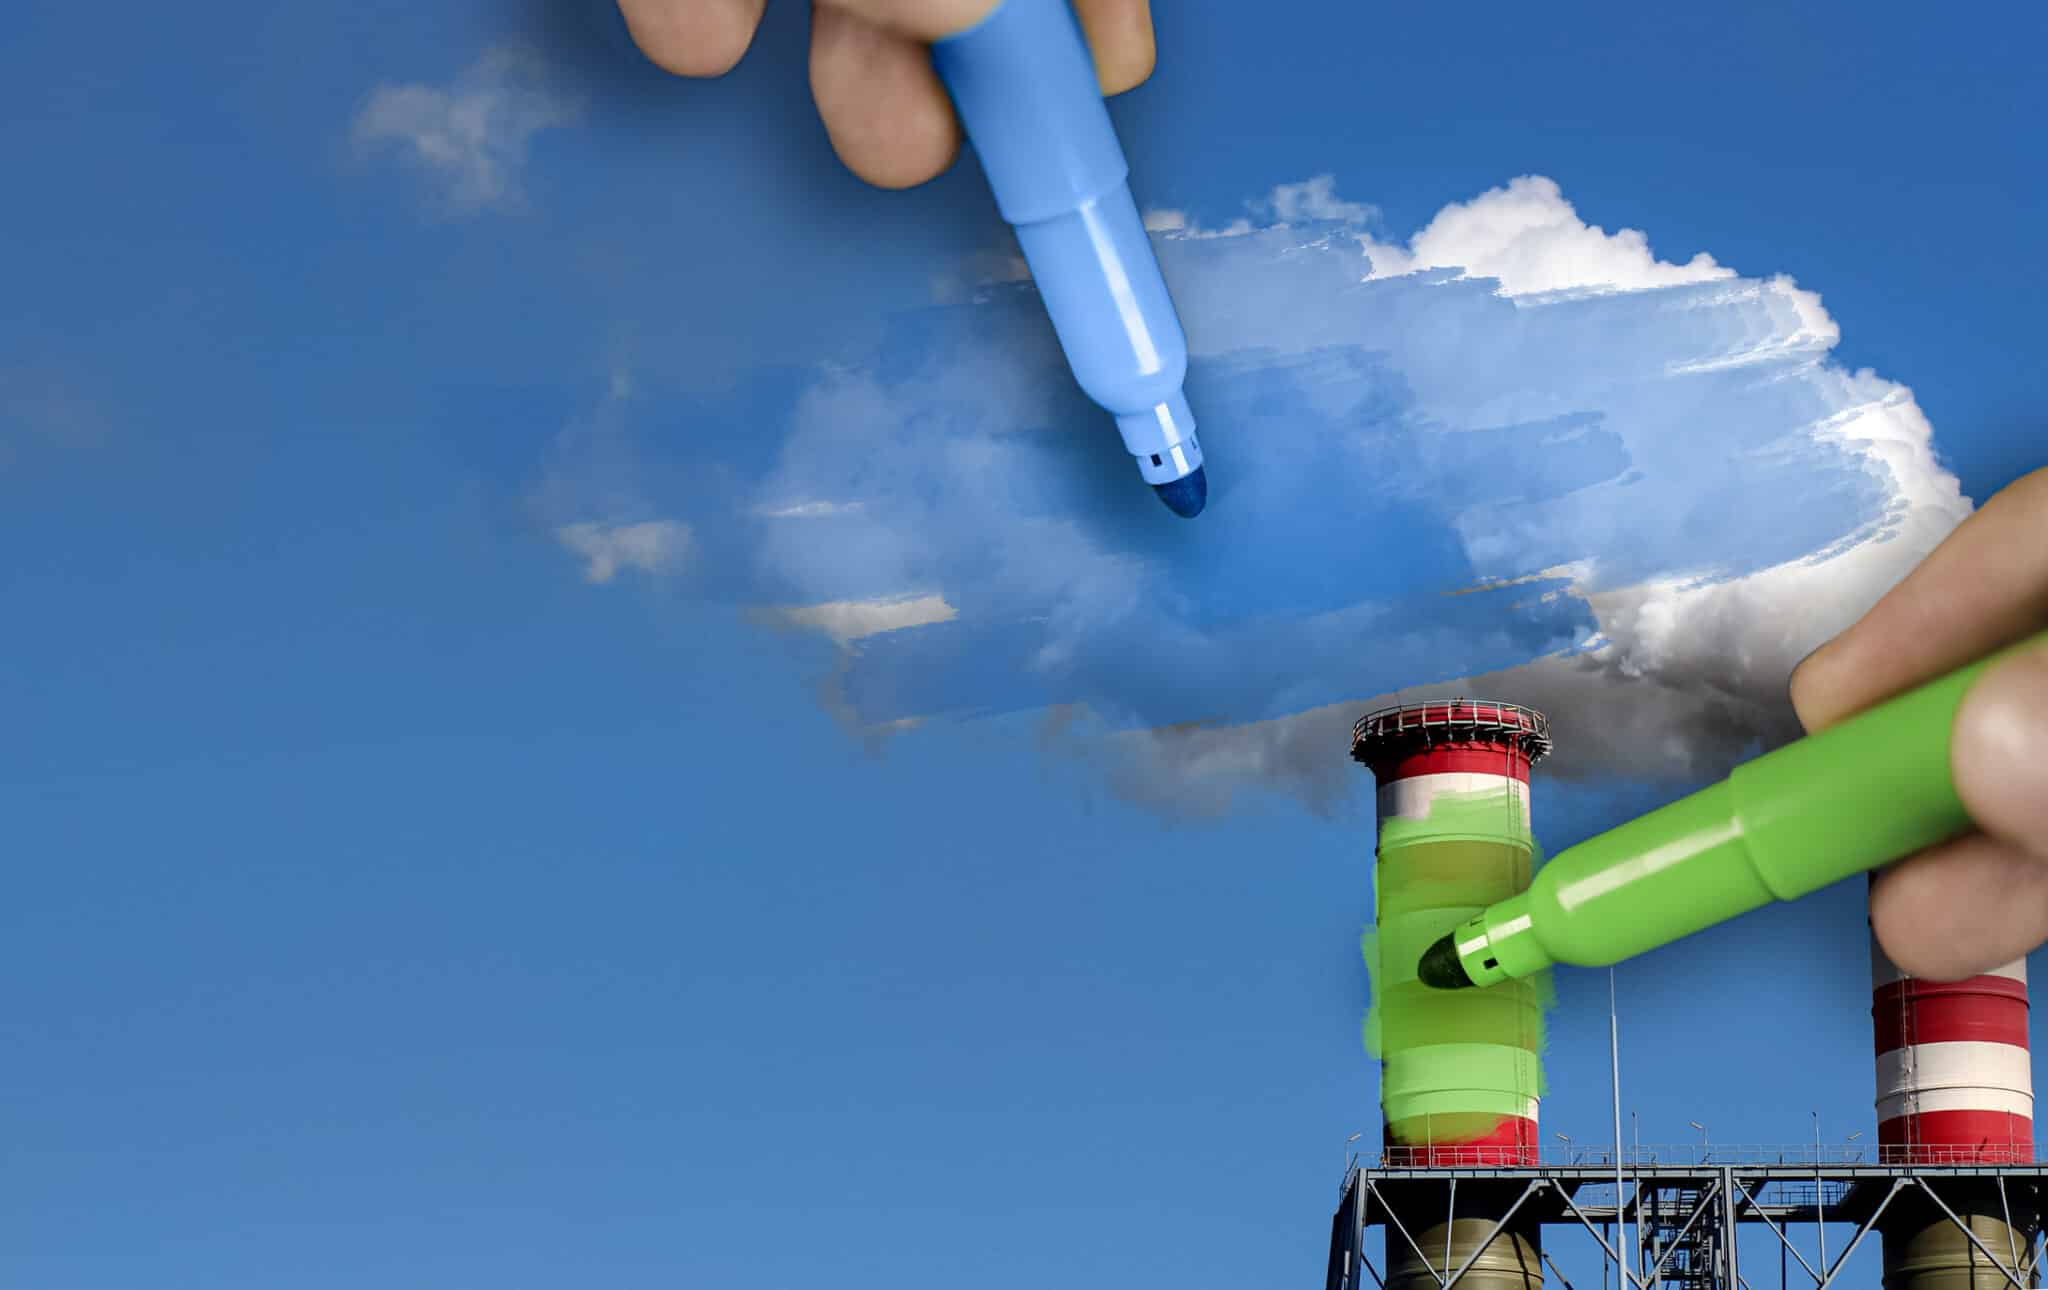 hands painting pollution blue and polluting chimneys green. Greenwashing malpractice concept